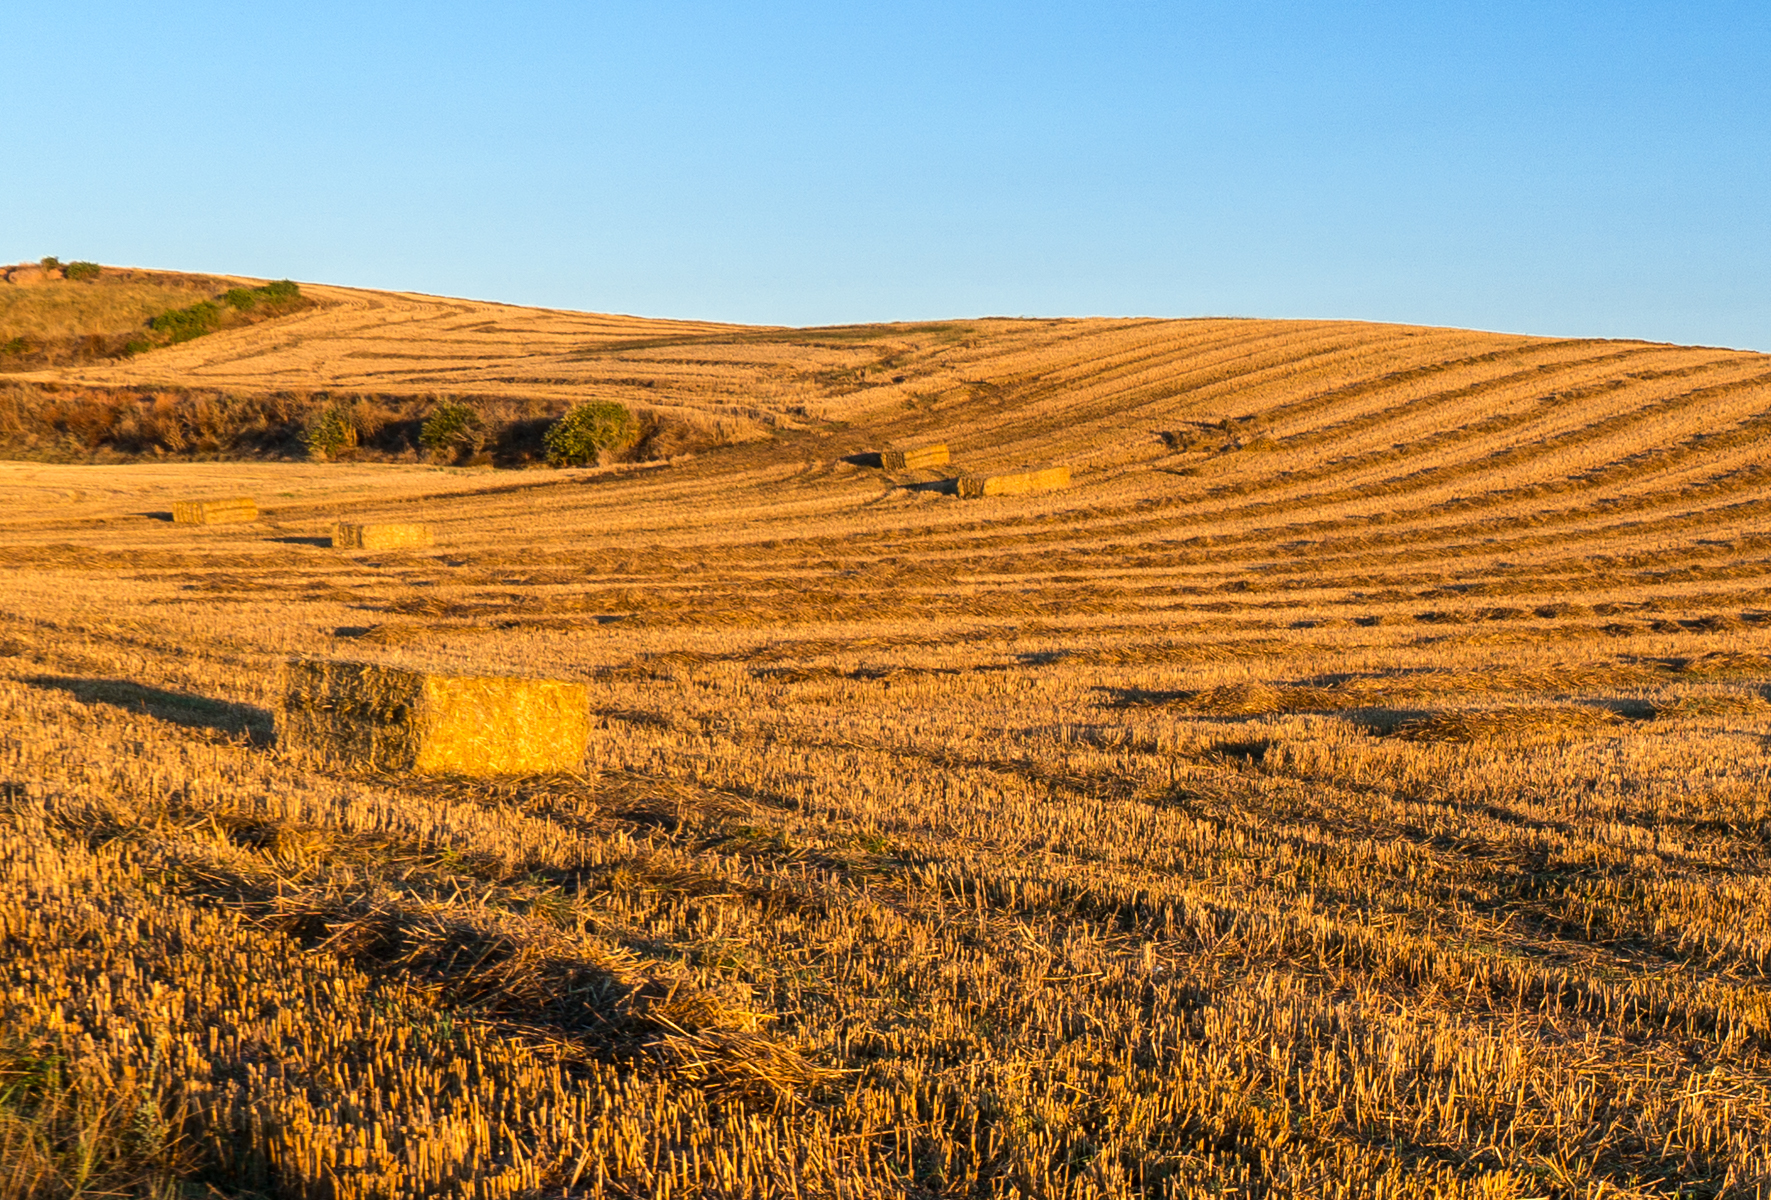 Baled hay in harvested field at sunrise on the Camino Francés approximately 5.5 km west of Azofra, Spain | Photo by Mike Hudak